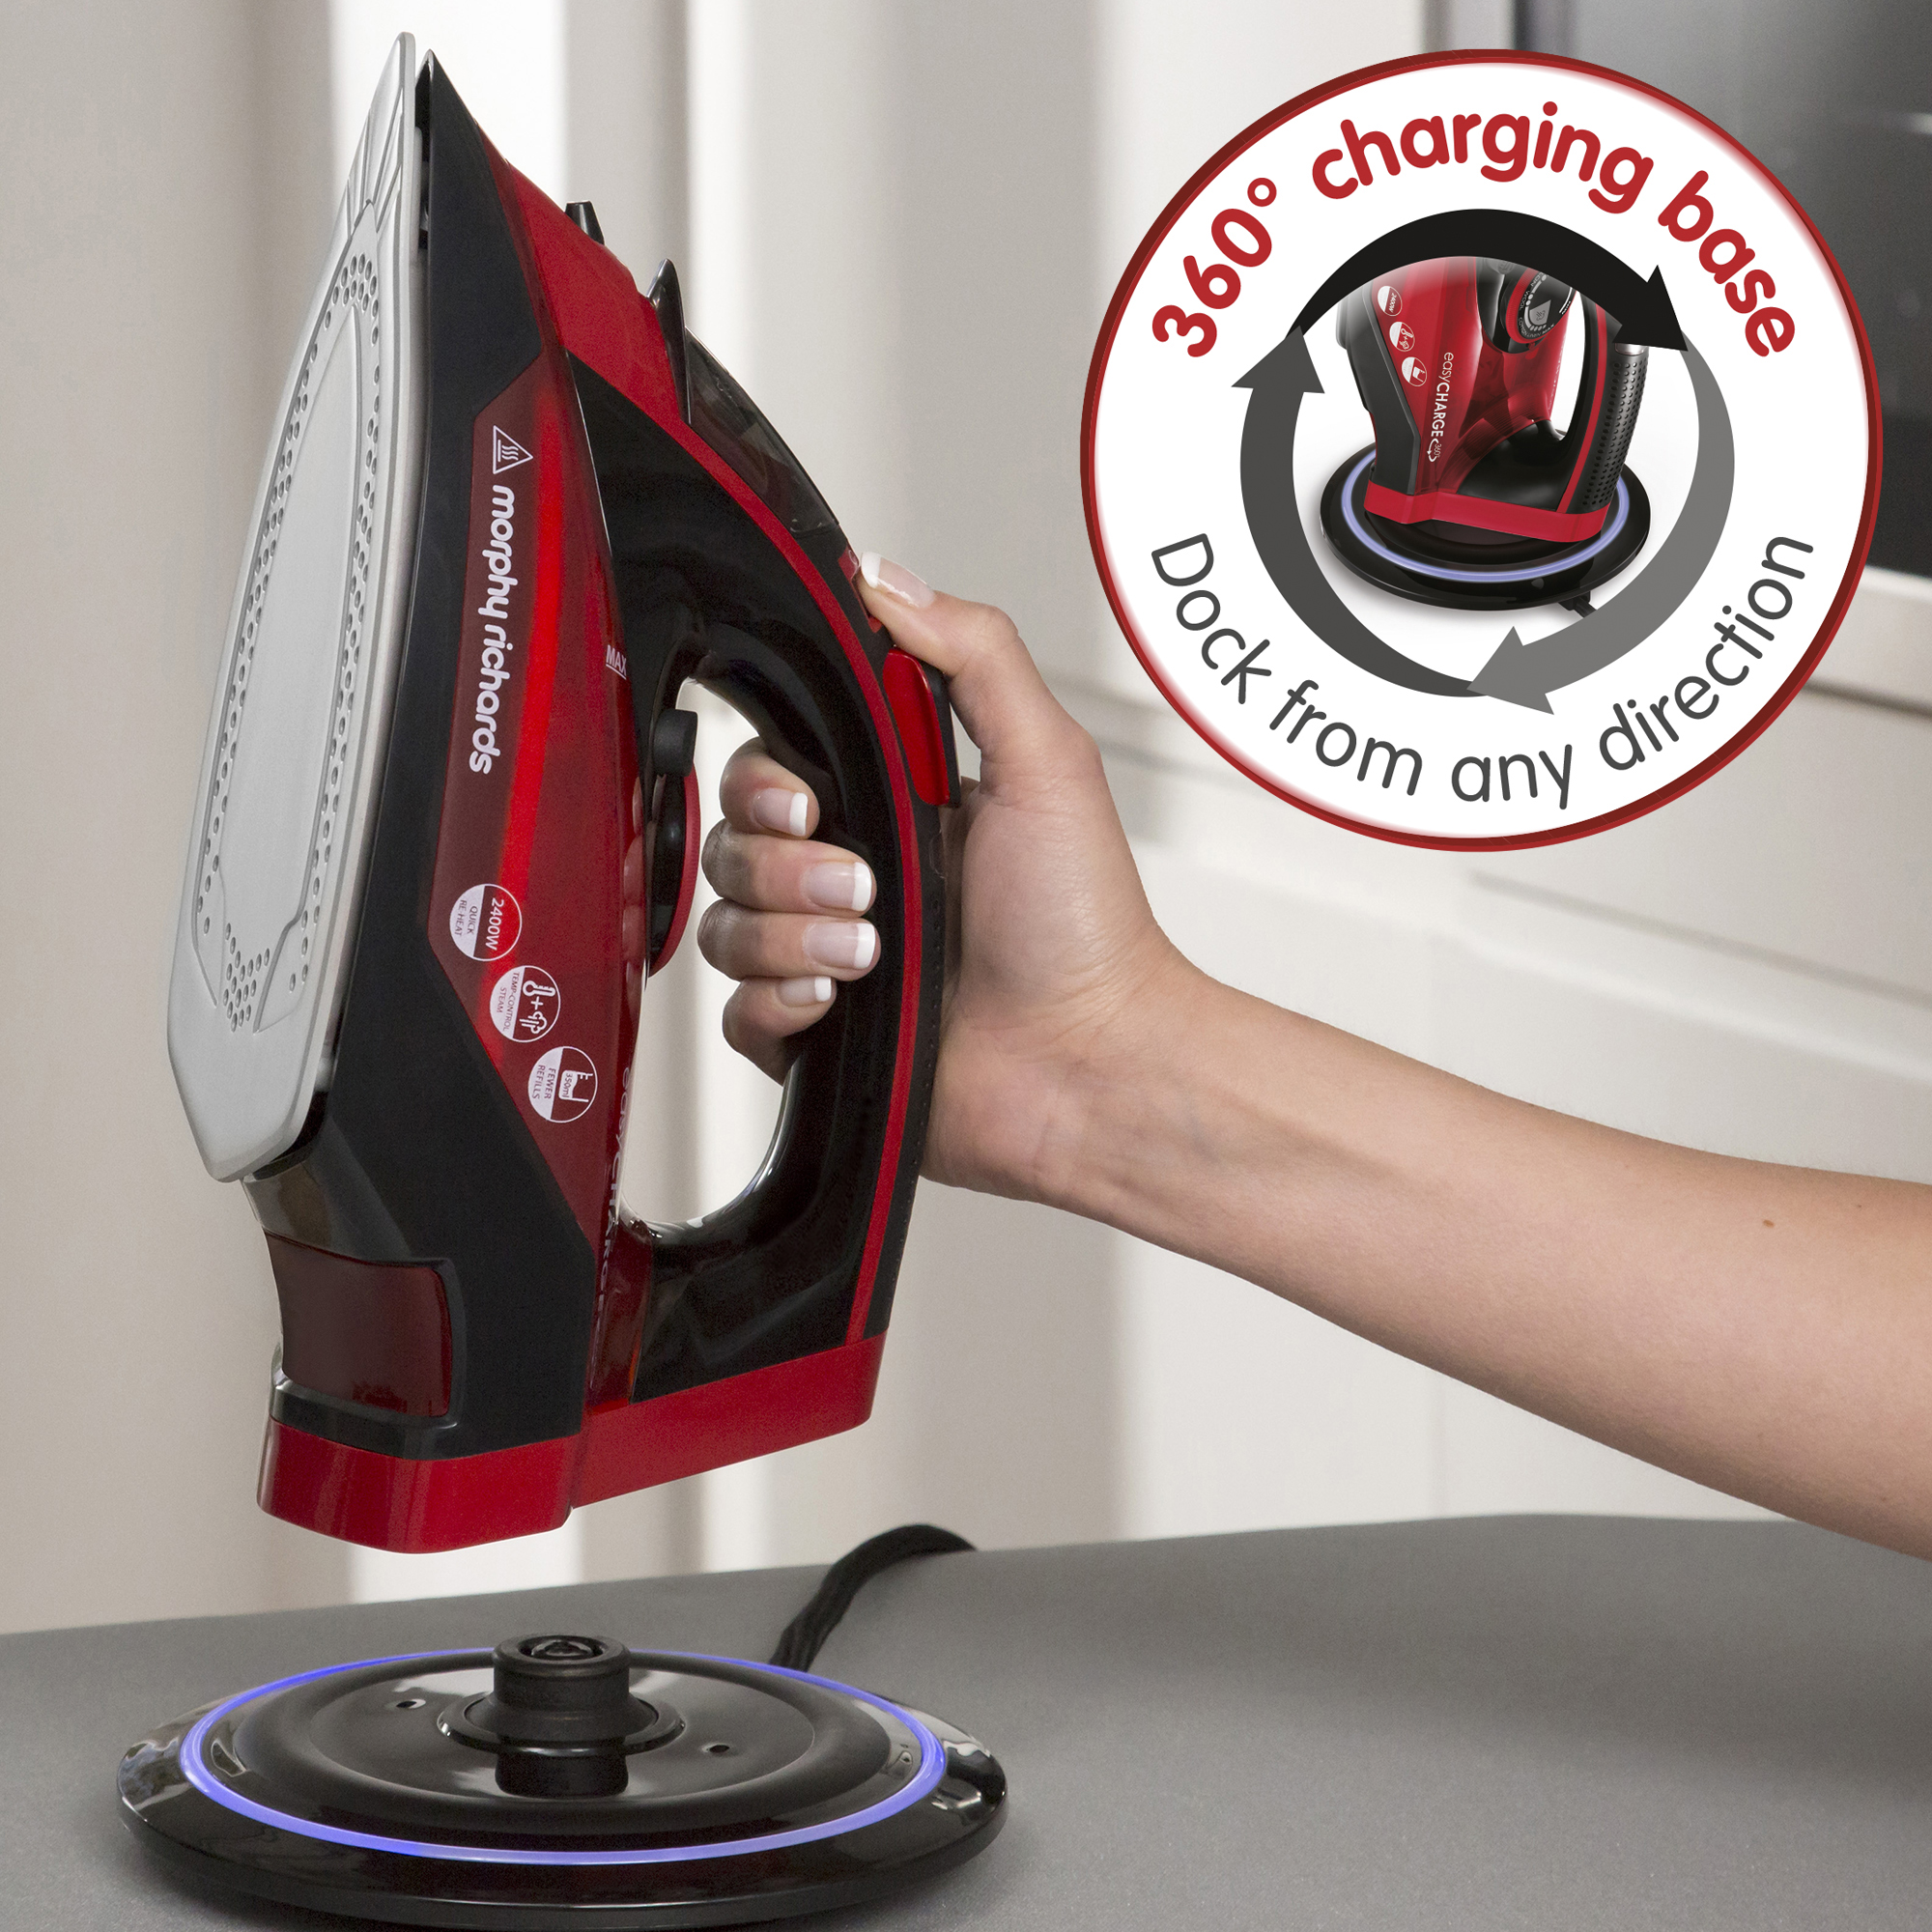 MORPHY RICHARDS 303250 EASYCHARGE CORDLESS STEAM IRON 2600W